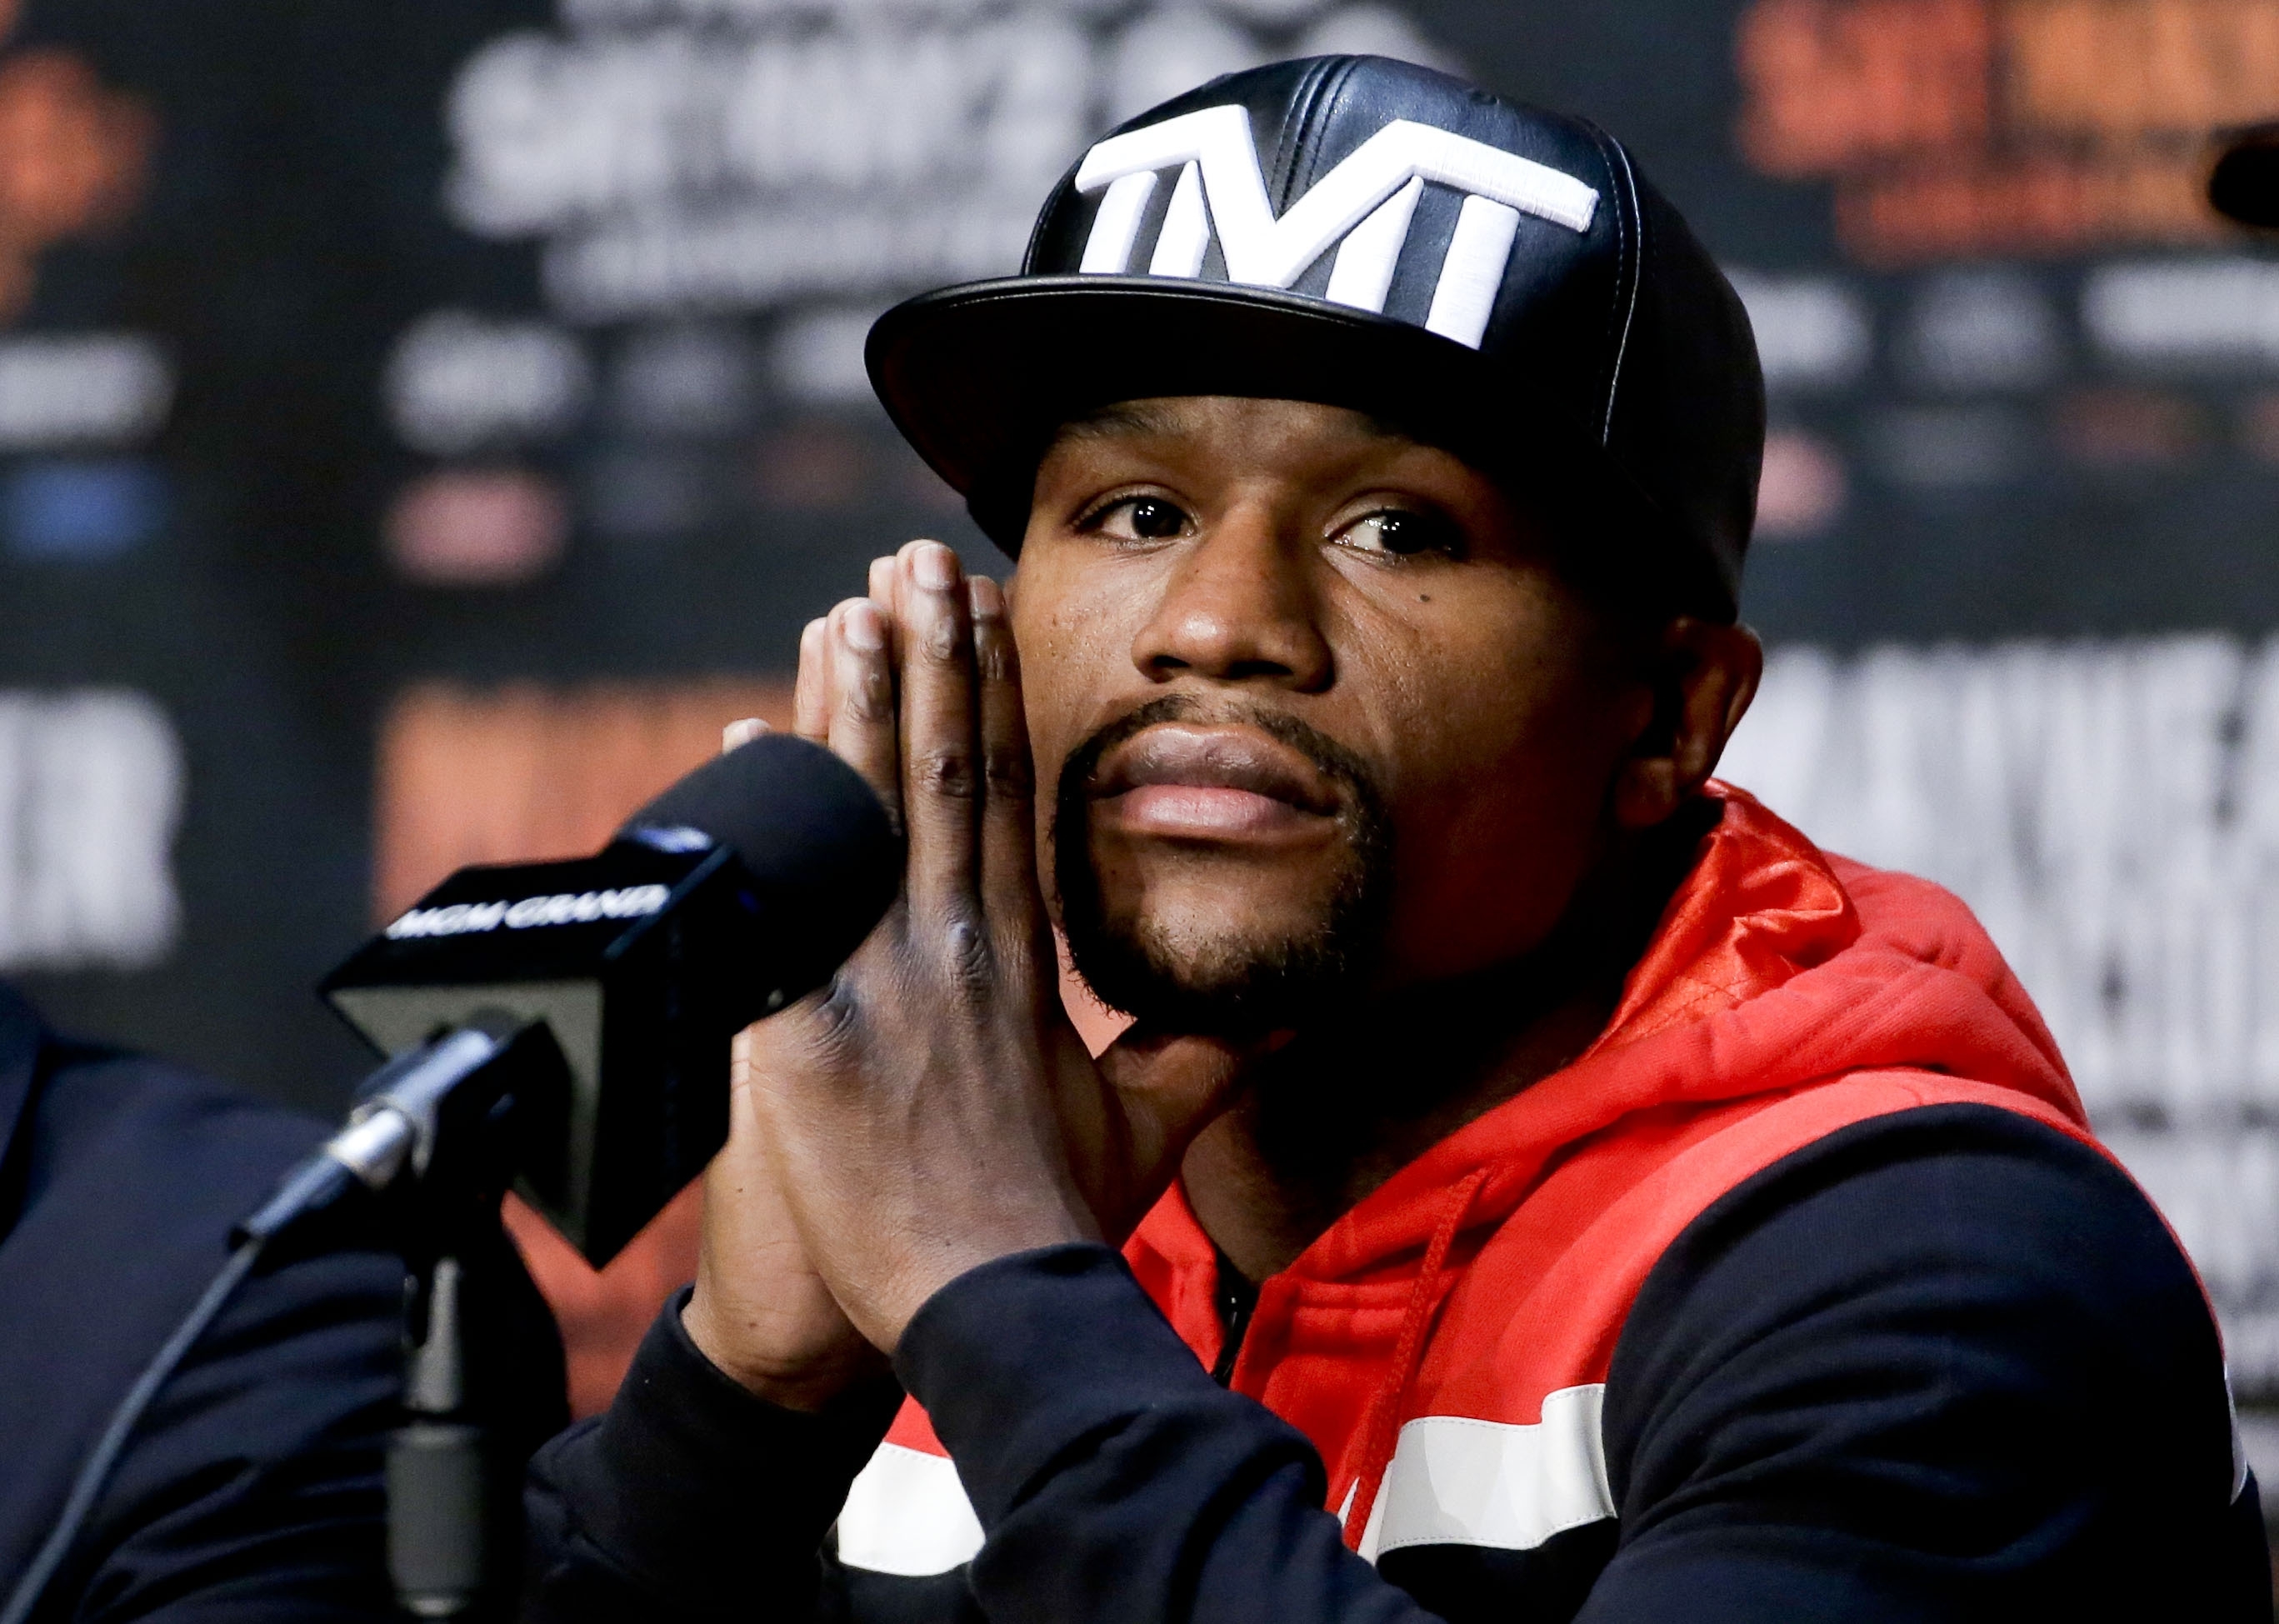 Floyd Mayweather Jr. listens during a pre-fight news conference in Las Vegas,